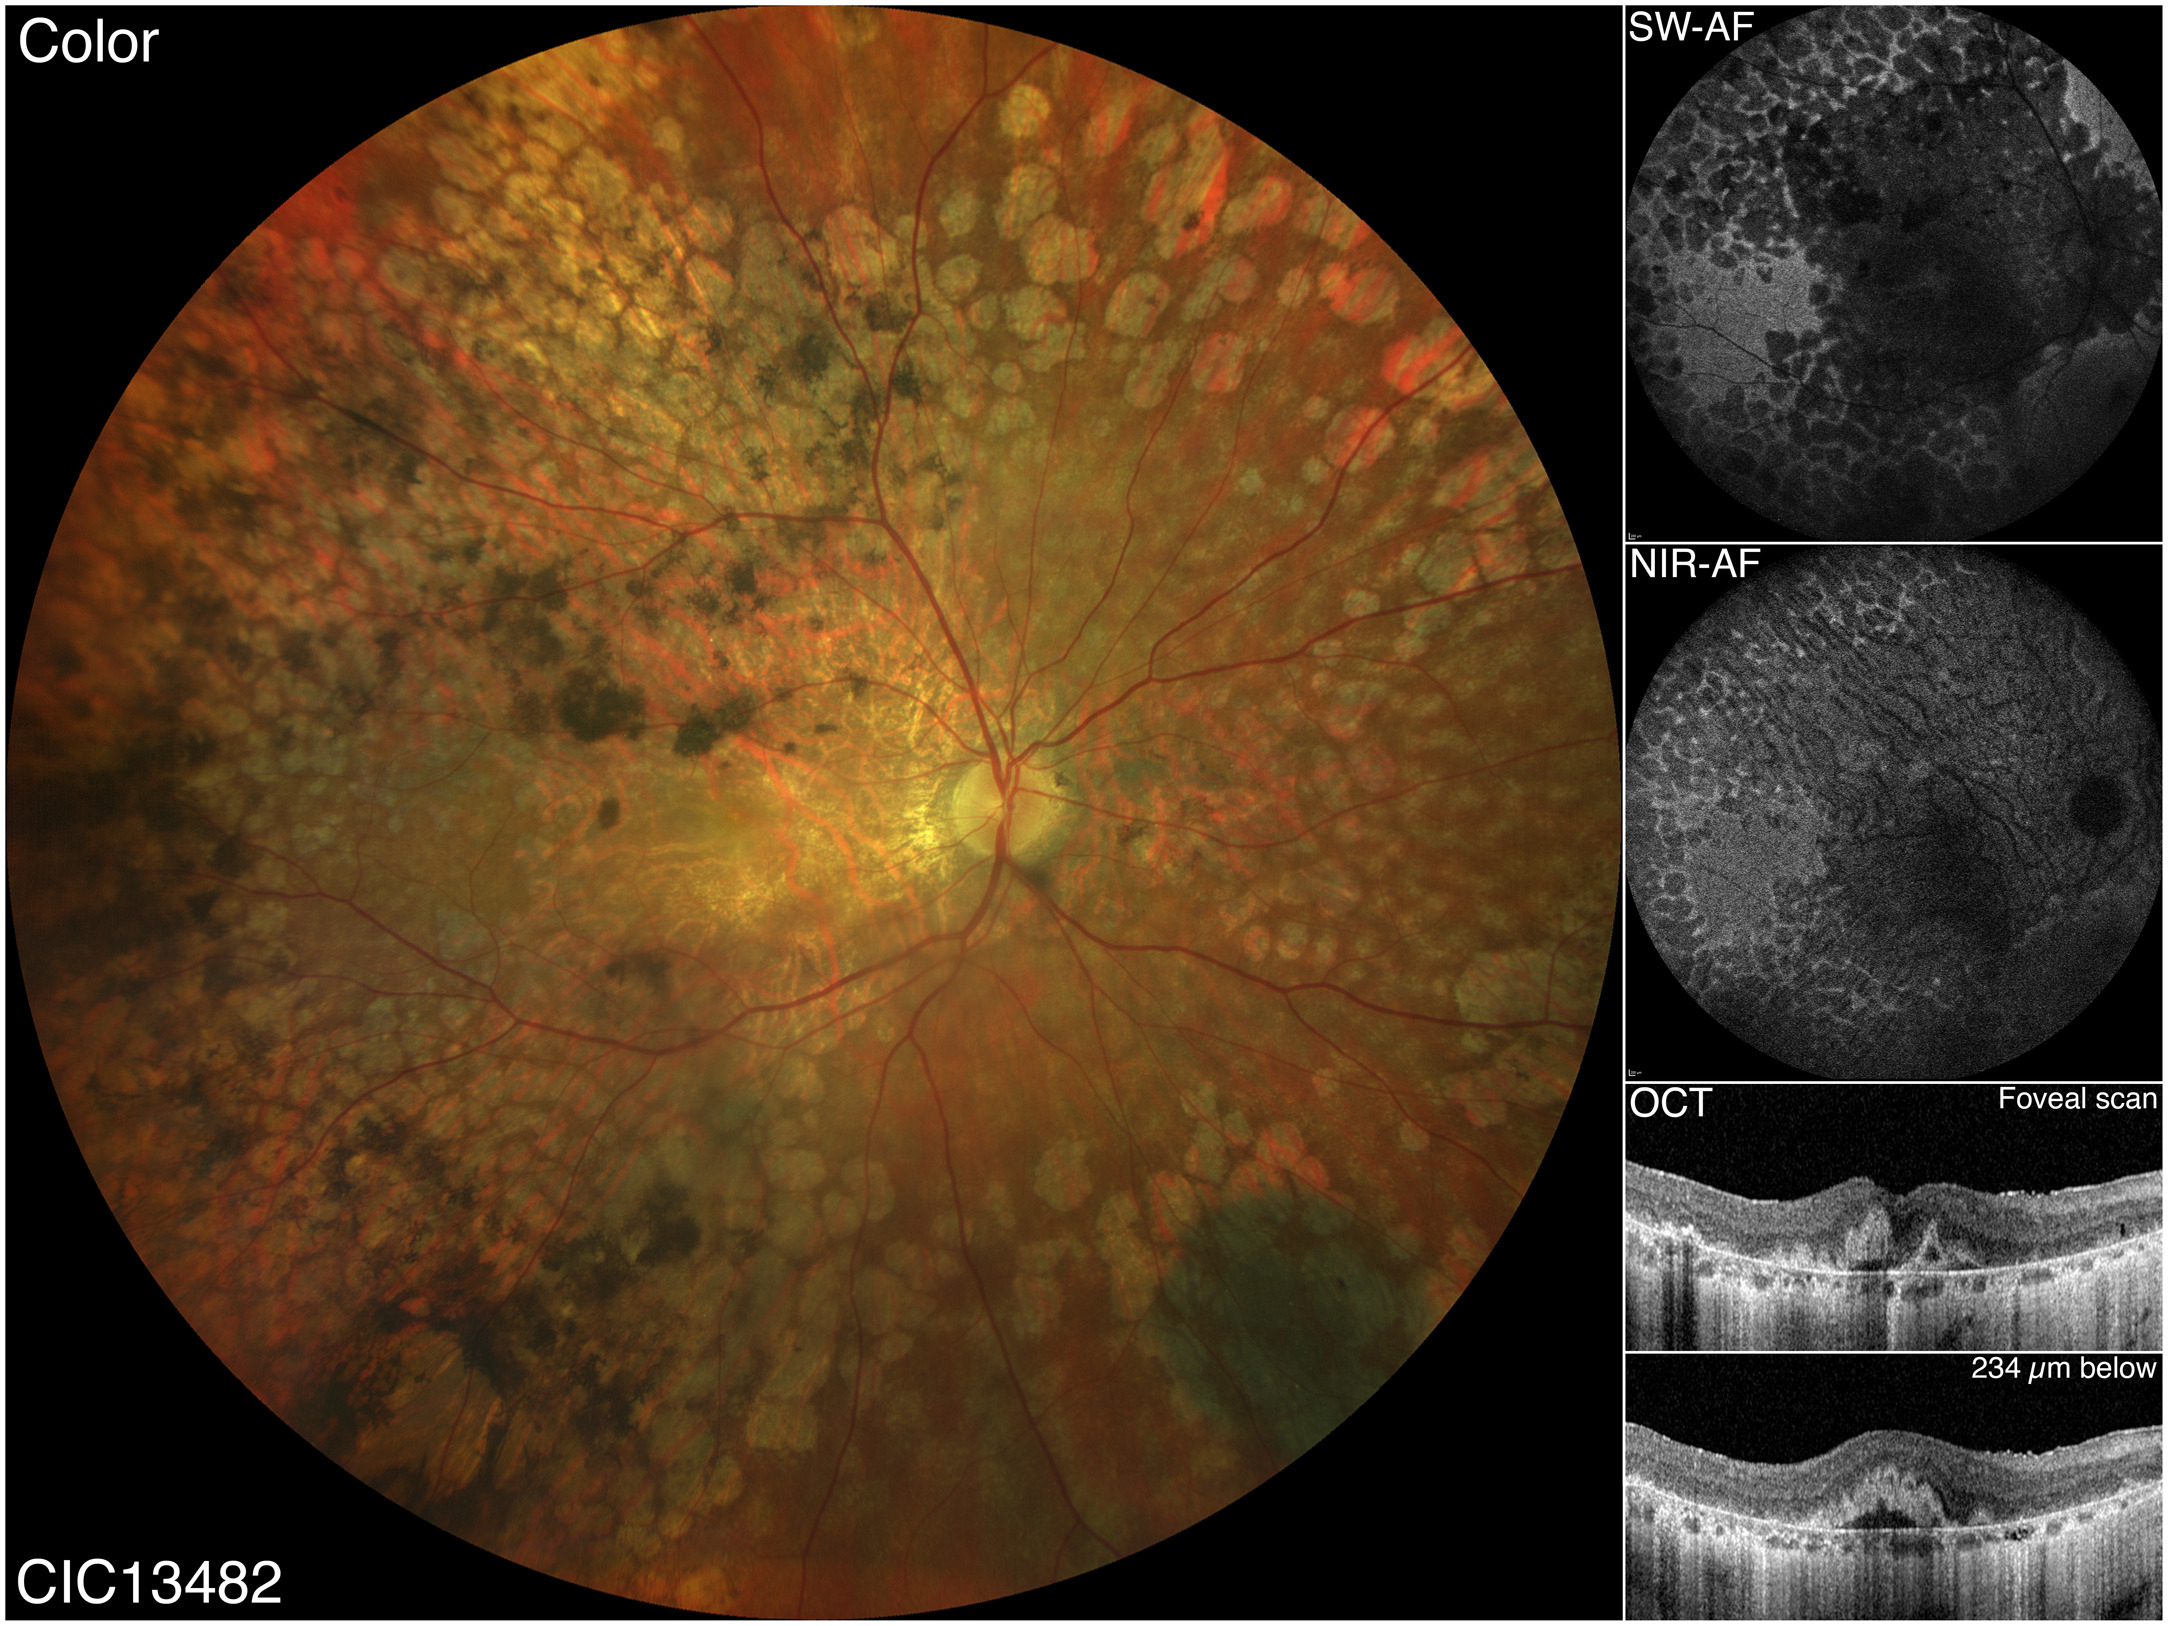 EMAP remains an underrecognized condition, especially among the elderly, who are more likely to be misdiagnosed with AMD. Earlier onset, more rapid progression of atrophy, and severe visual loss were noted in the former in contrast to the latter condition. The multimodal imaging of advanced EMAP above (from the study) exhibits a diffuse retinal involvement with “confluent” pavingstone-like degeneration merging with the extensive macular atrophy. OCT reveals large hyperreflective pyramidal structures within the atrophic fovea that are not clearly visible on color fundus photograph. 